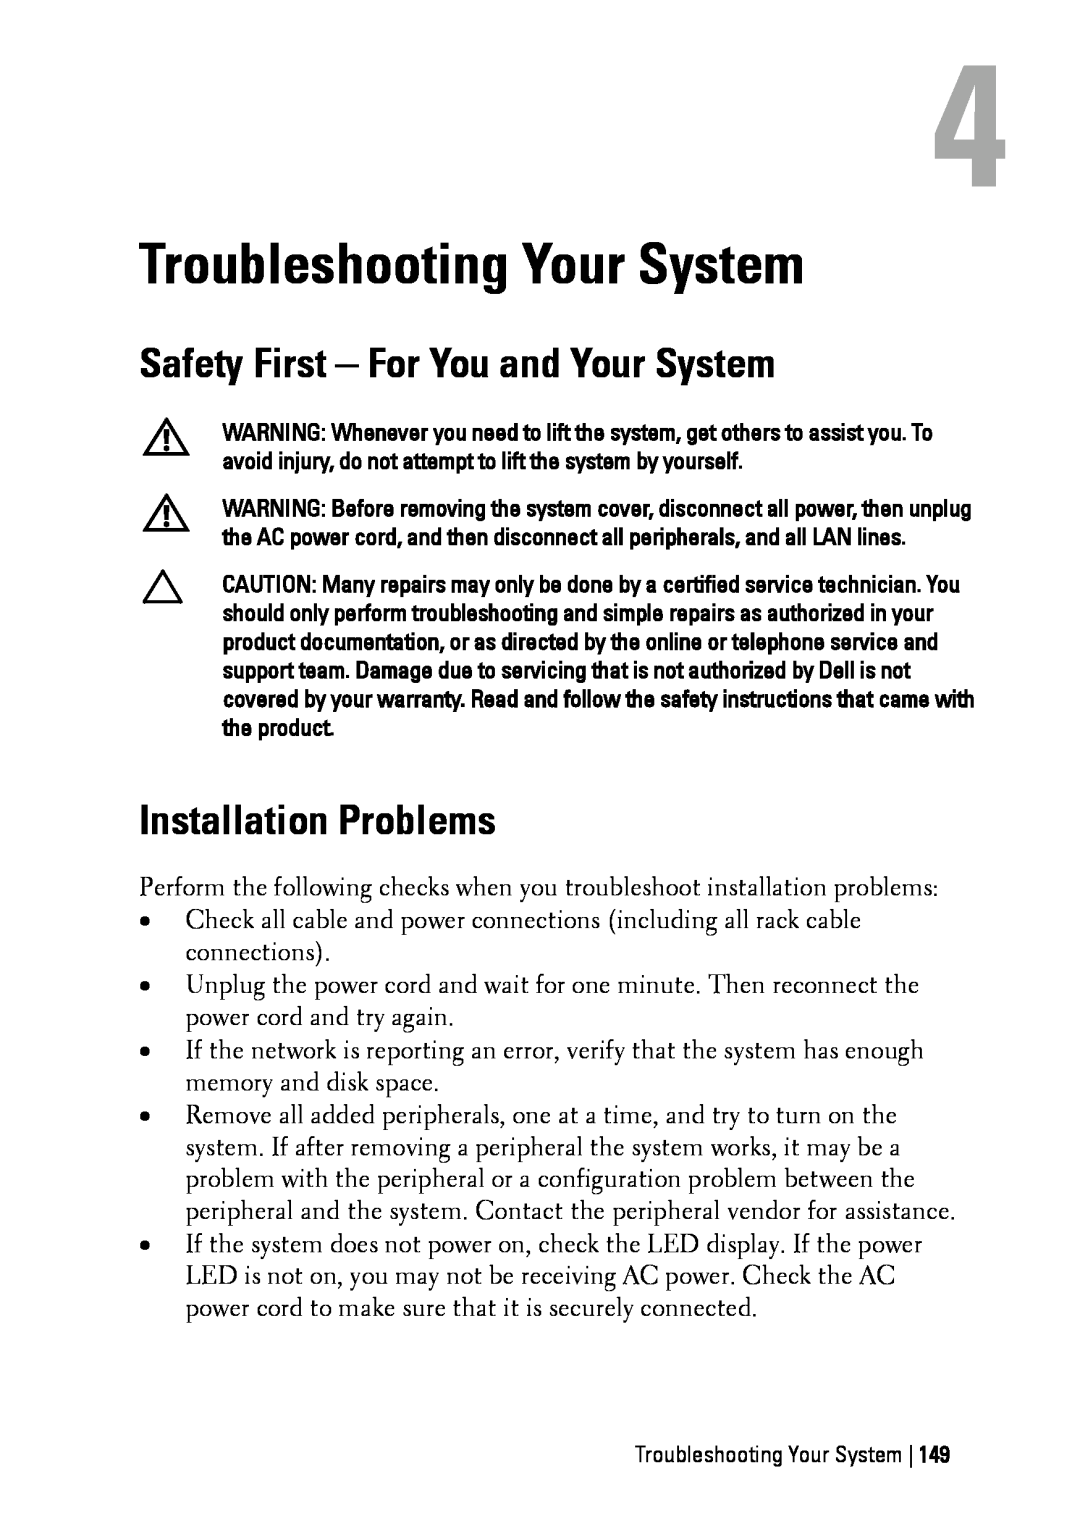 Dell C6145 manual Troubleshooting Your System, Safety First - For You and Your System, Installation Problems 